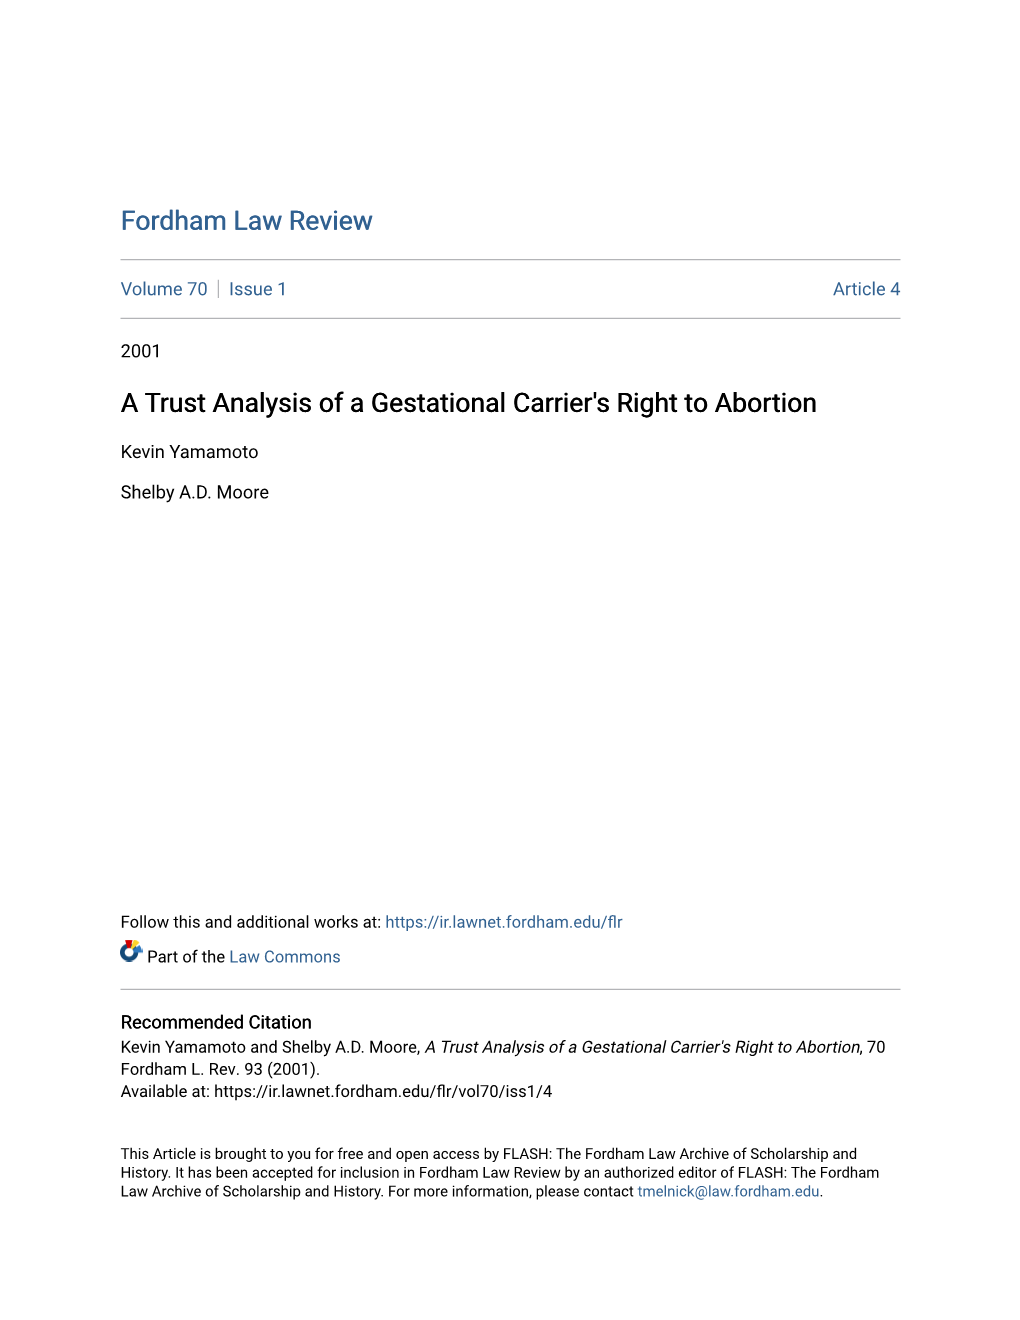 A Trust Analysis of a Gestational Carrier's Right to Abortion